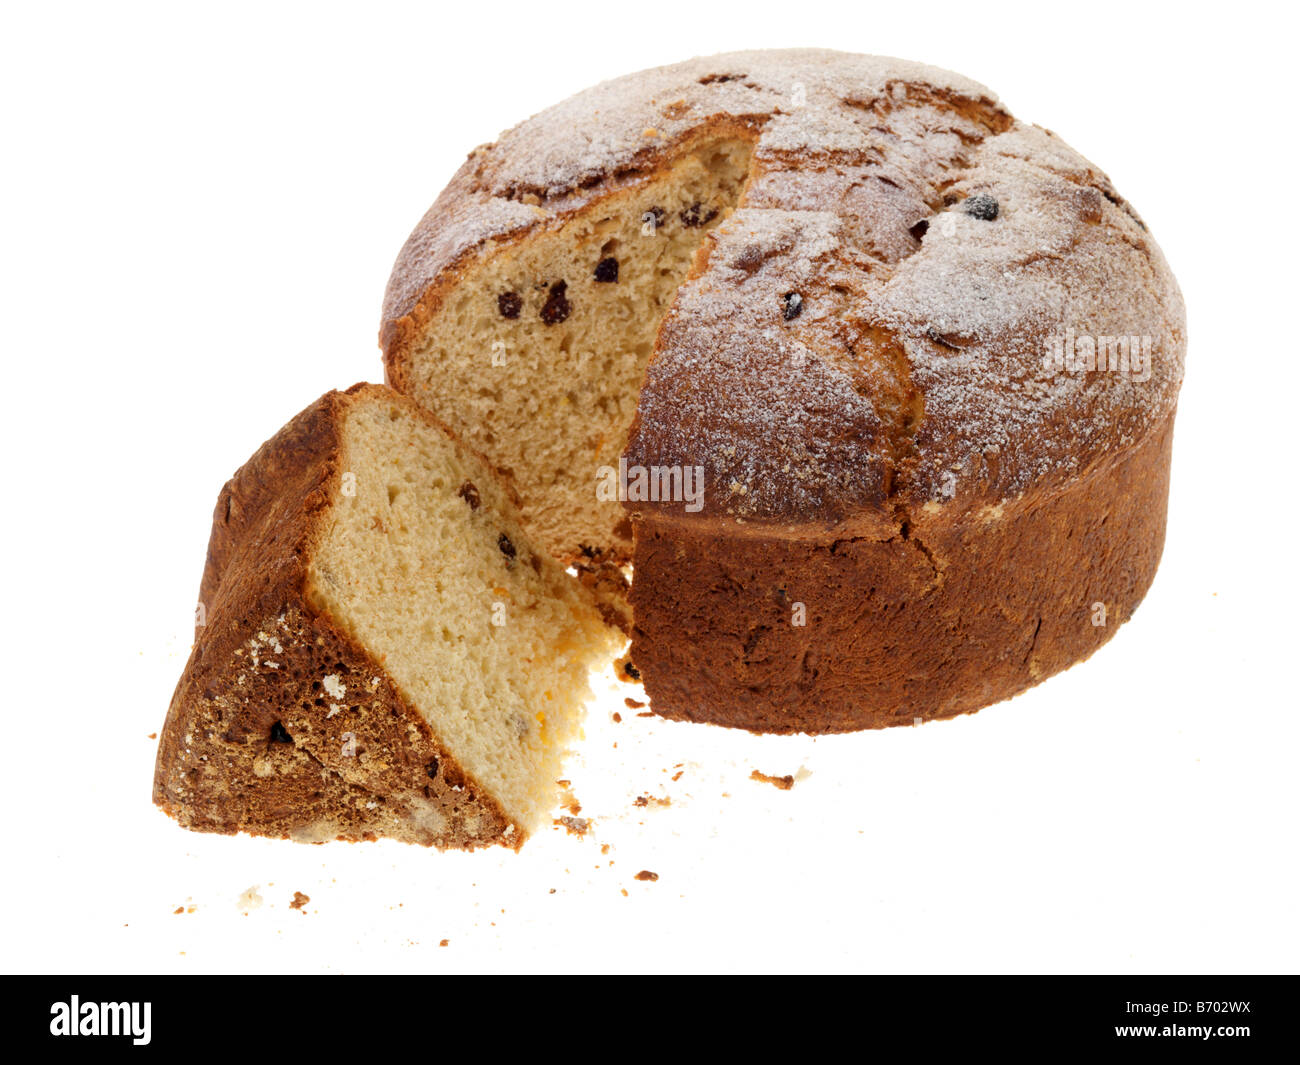 Freshly Baked Traditional Christmas Festive Season Panettone Fruit Cake Isolated Against A White Background With A Clipping Path And No People Stock Photo